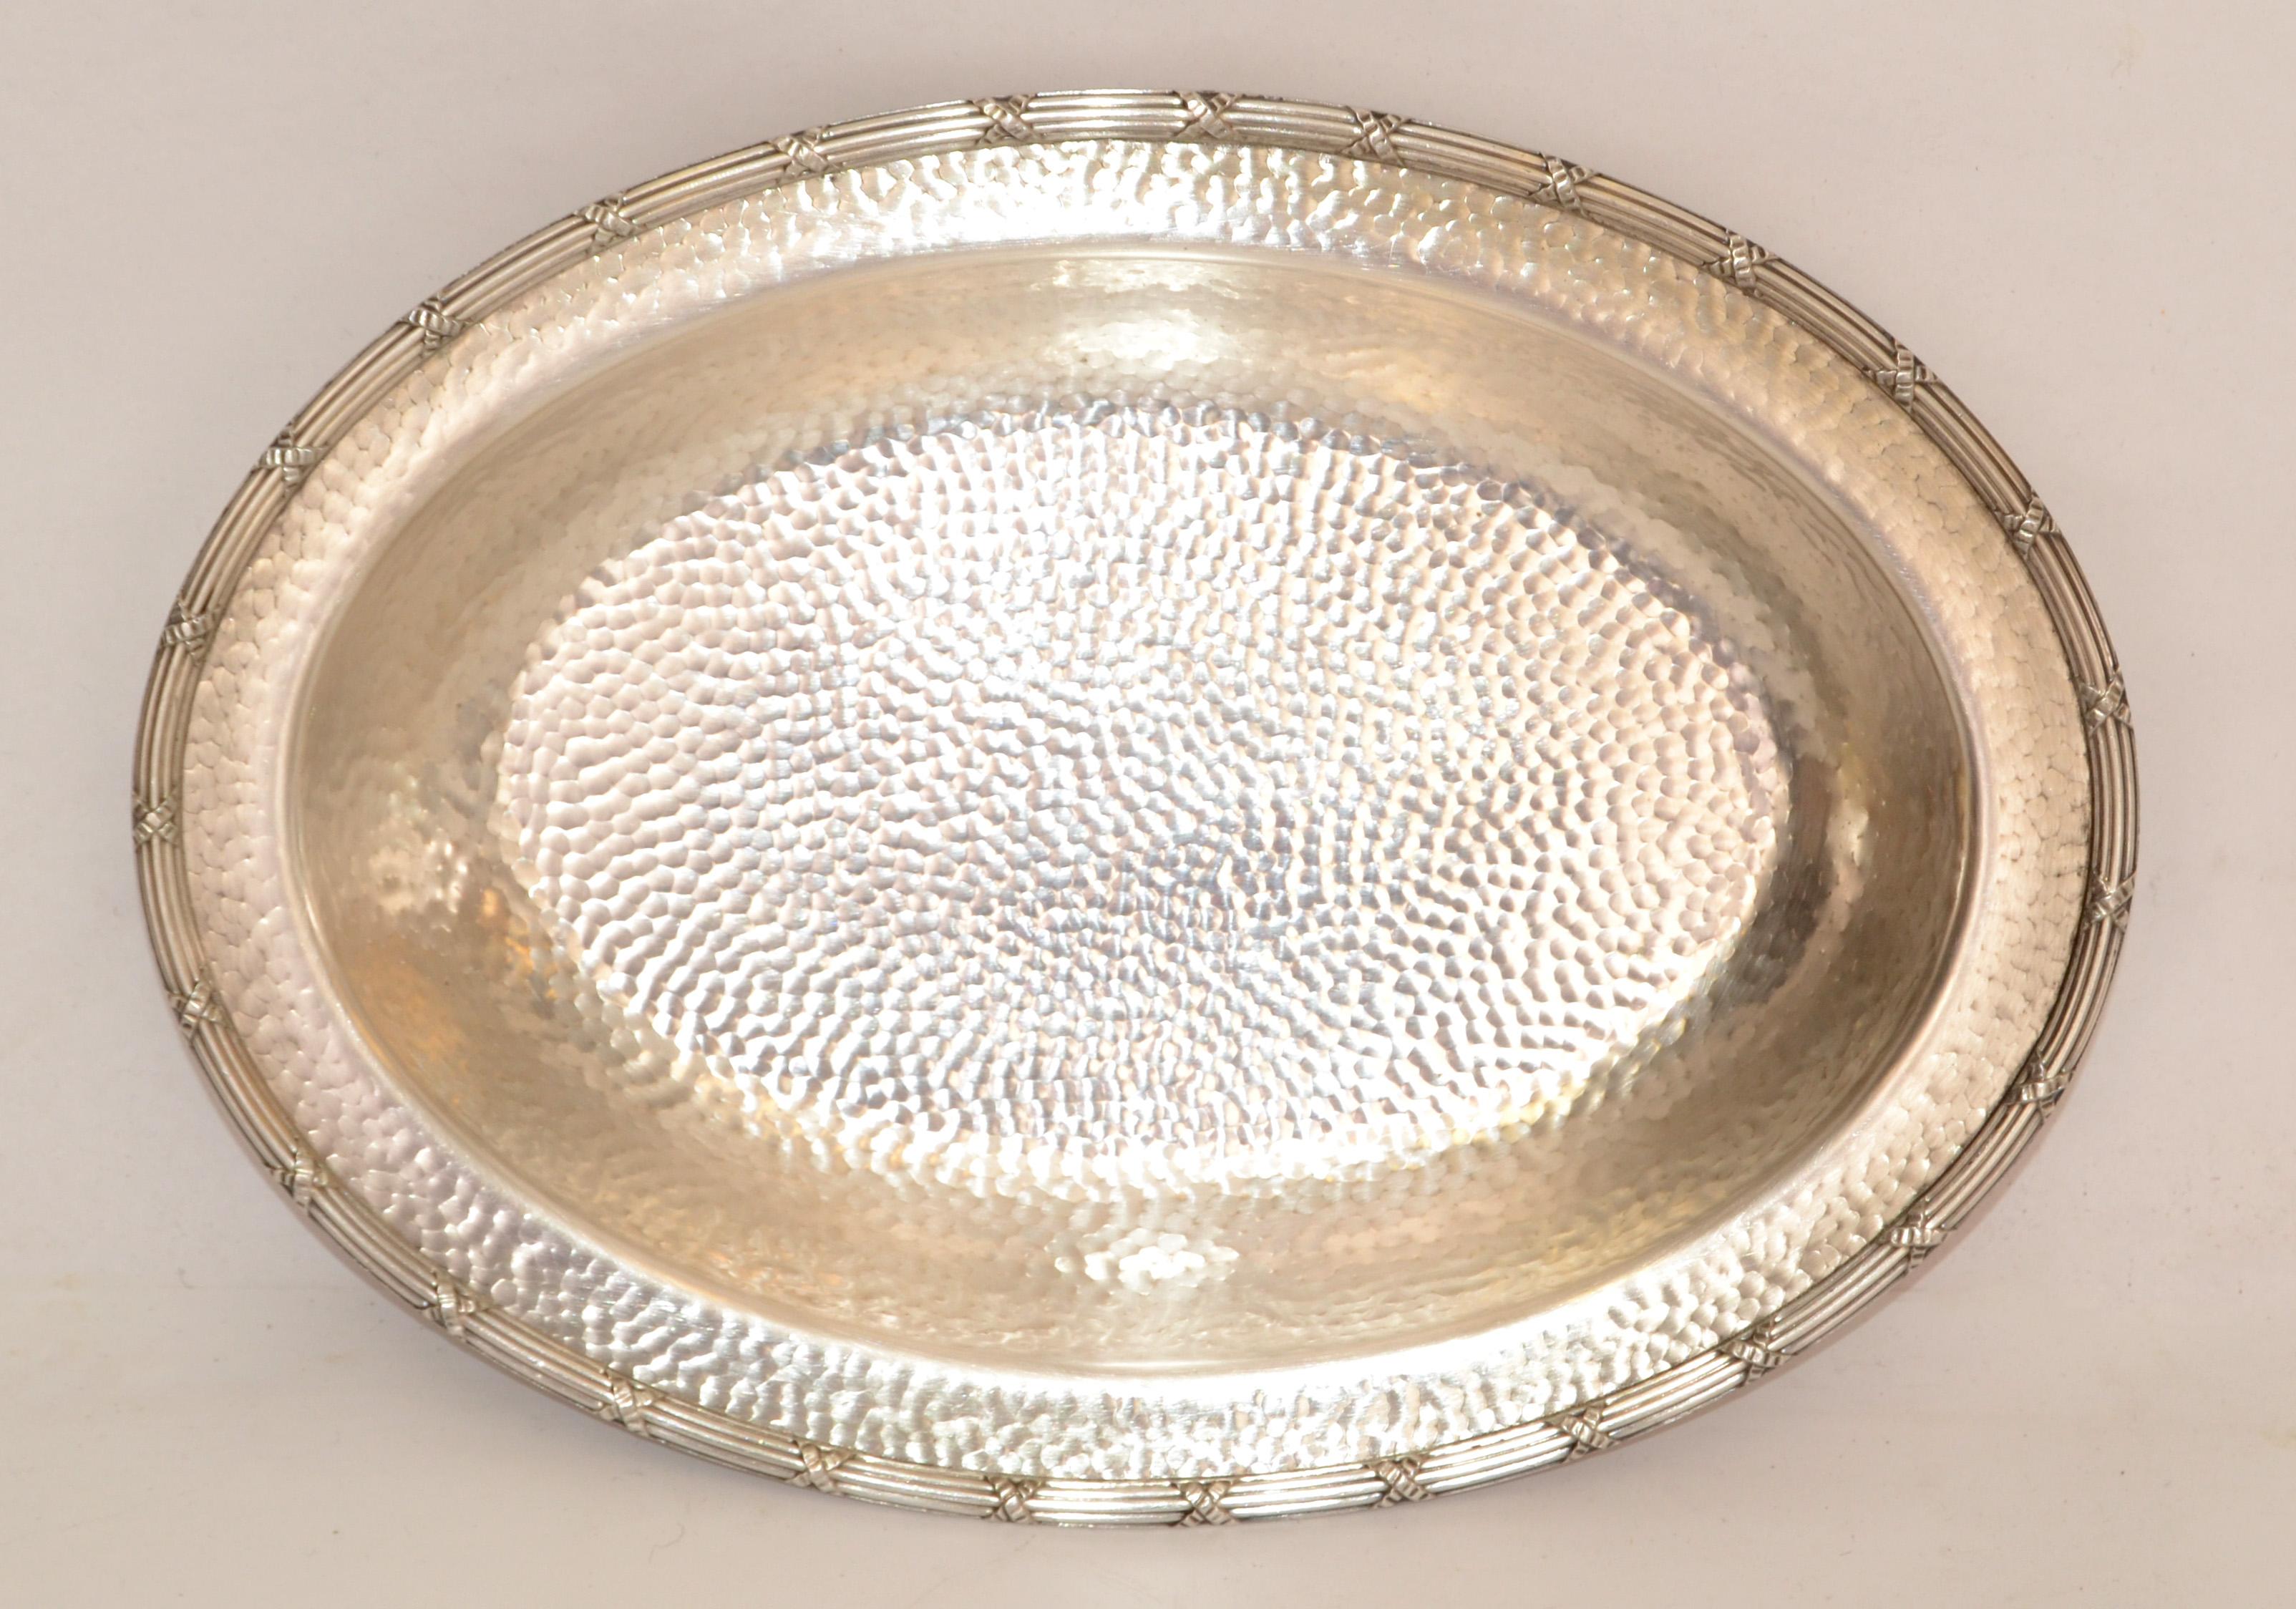 Mid-20th Century Art Deco 1969 Hand-Hammered Silver Plate EPNS 2245 Centerpiece Decorative Bowl For Sale